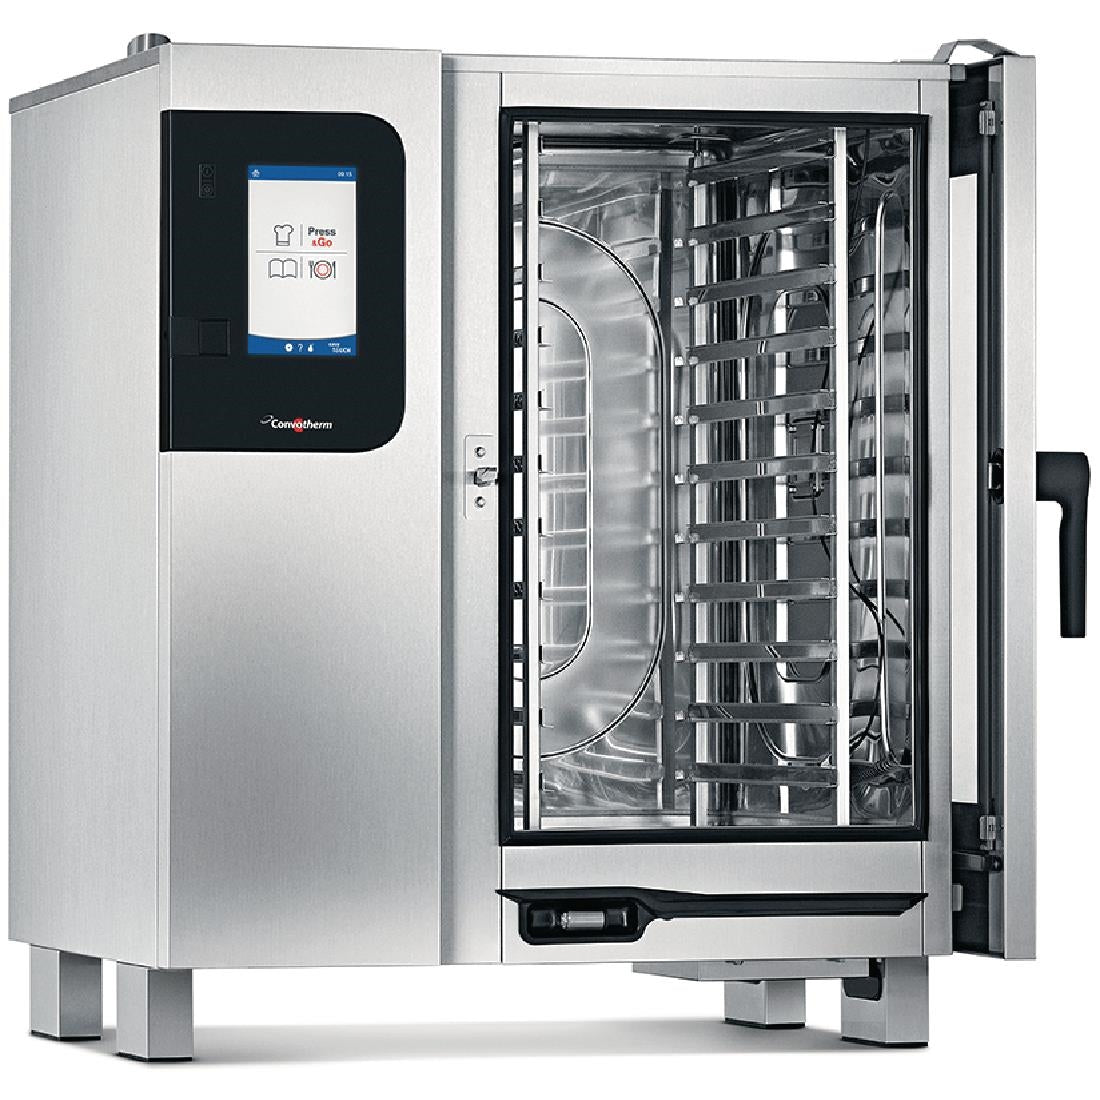 HC256-MO Convotherm 4 easyTouch Combi Oven 10 x 1 x1 GN Grid JD Catering Equipment Solutions Ltd